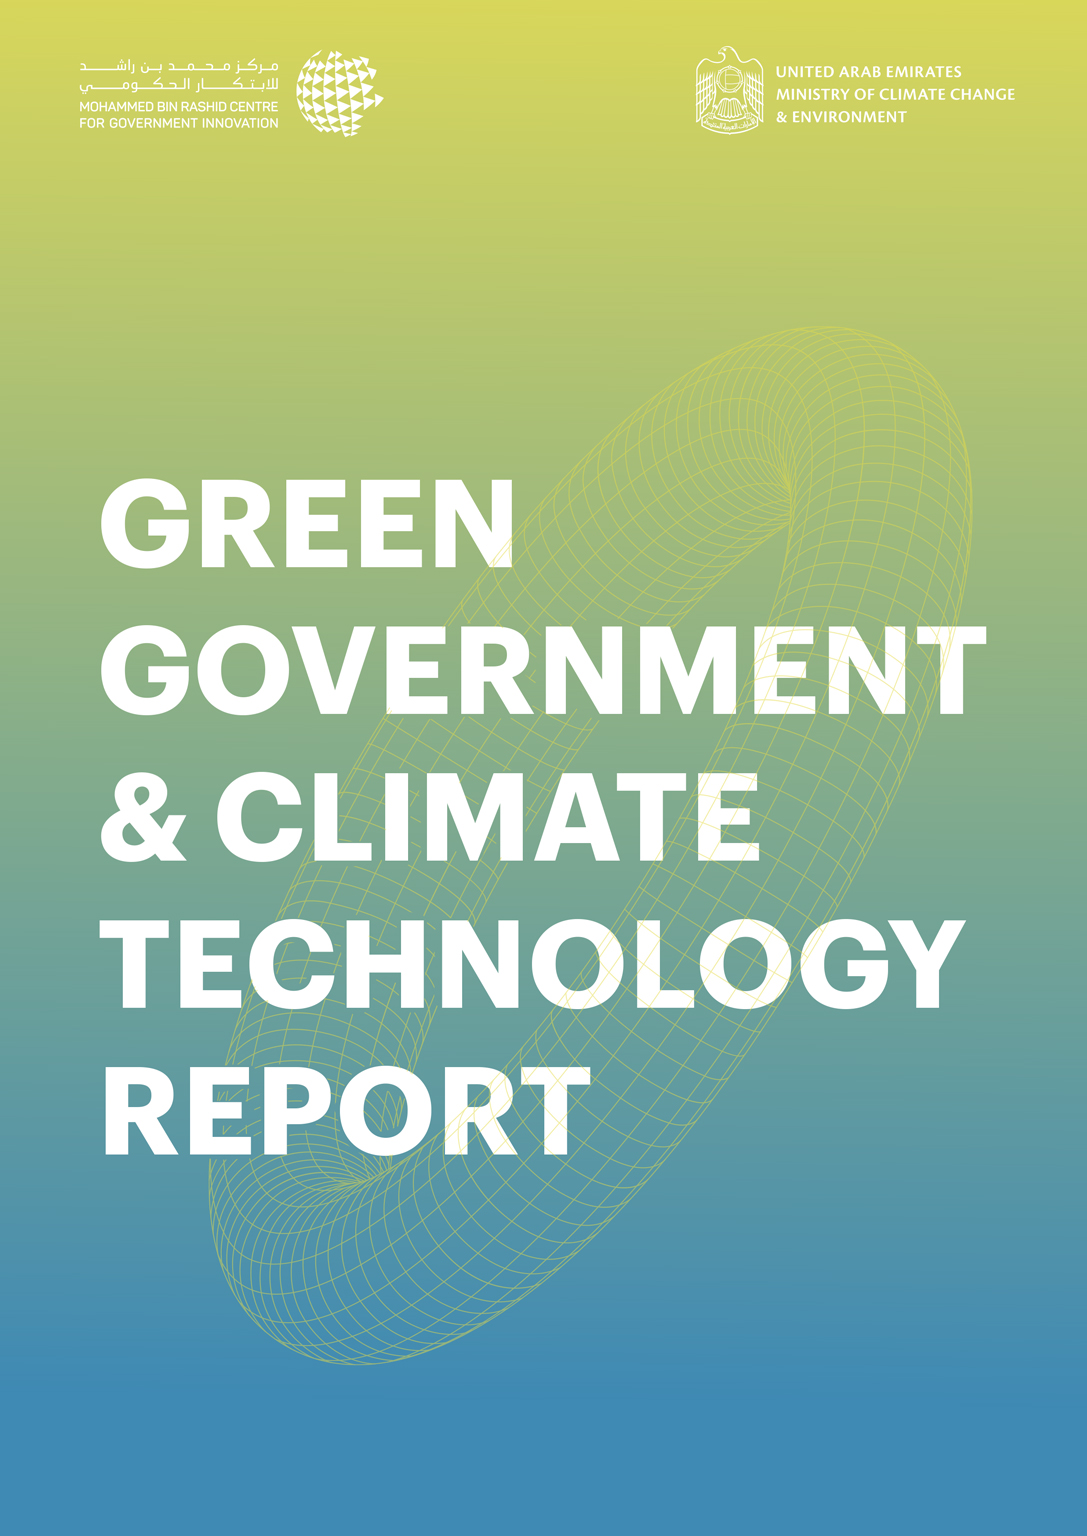 GREEN GOVERNMENT & CLIMATE TECHNOLOGY REPORT